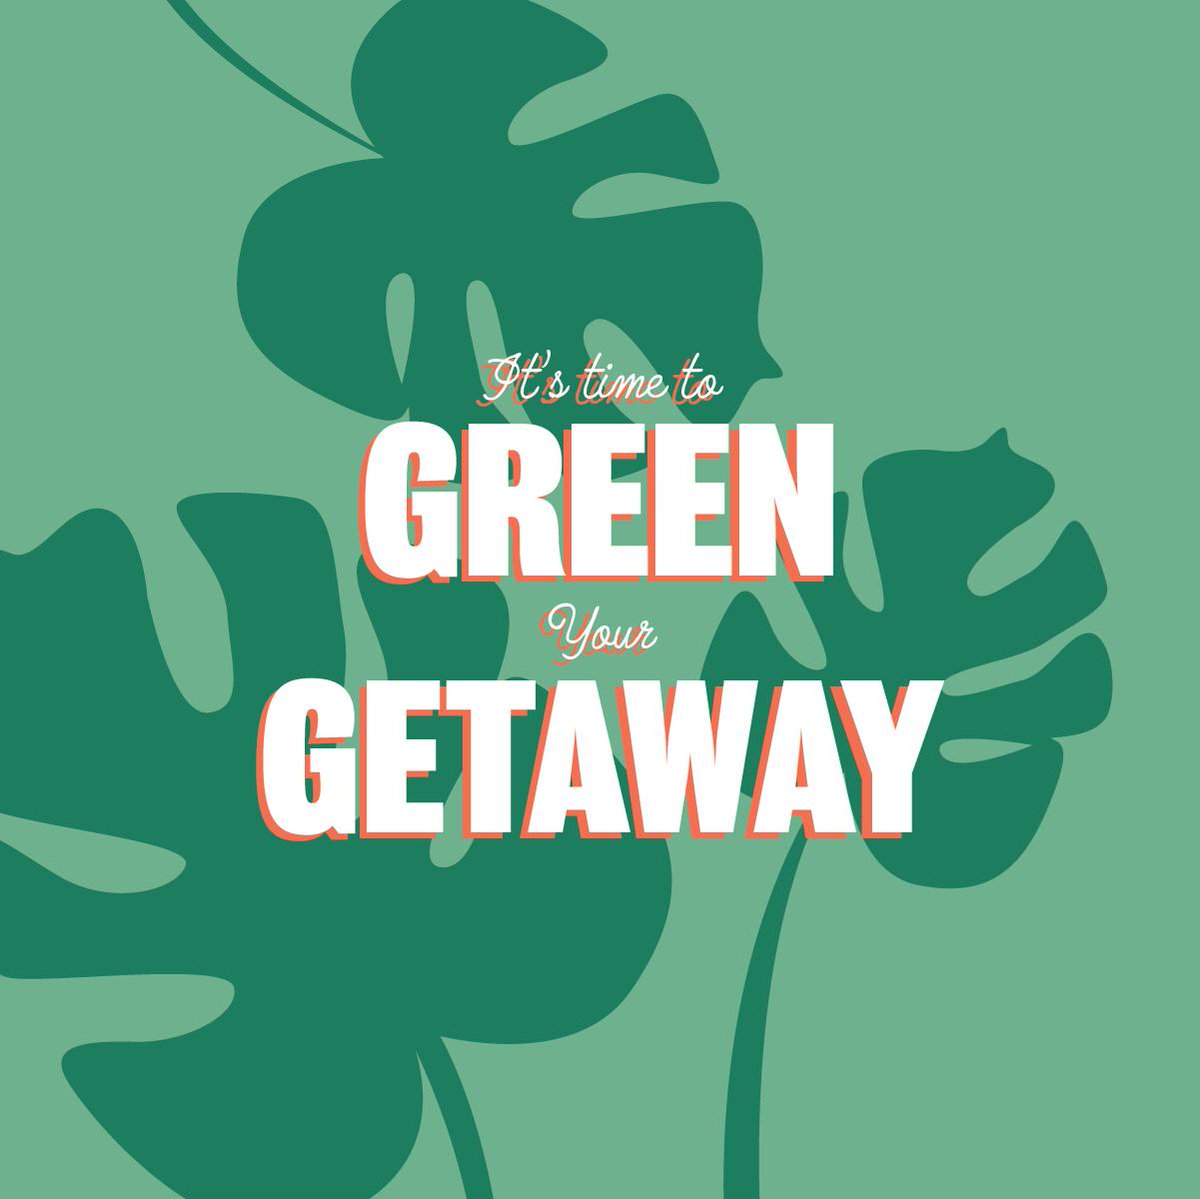 Our friends at @DoSomething are calling on YOU to share tips with friends on how to travel sustainably this summer☀️Sign up for their #GreenYourGetaway campaign to be entered for a chance to win fun prizes like gift cards or even a $5k scholarship!  bit.ly/2SDoujD